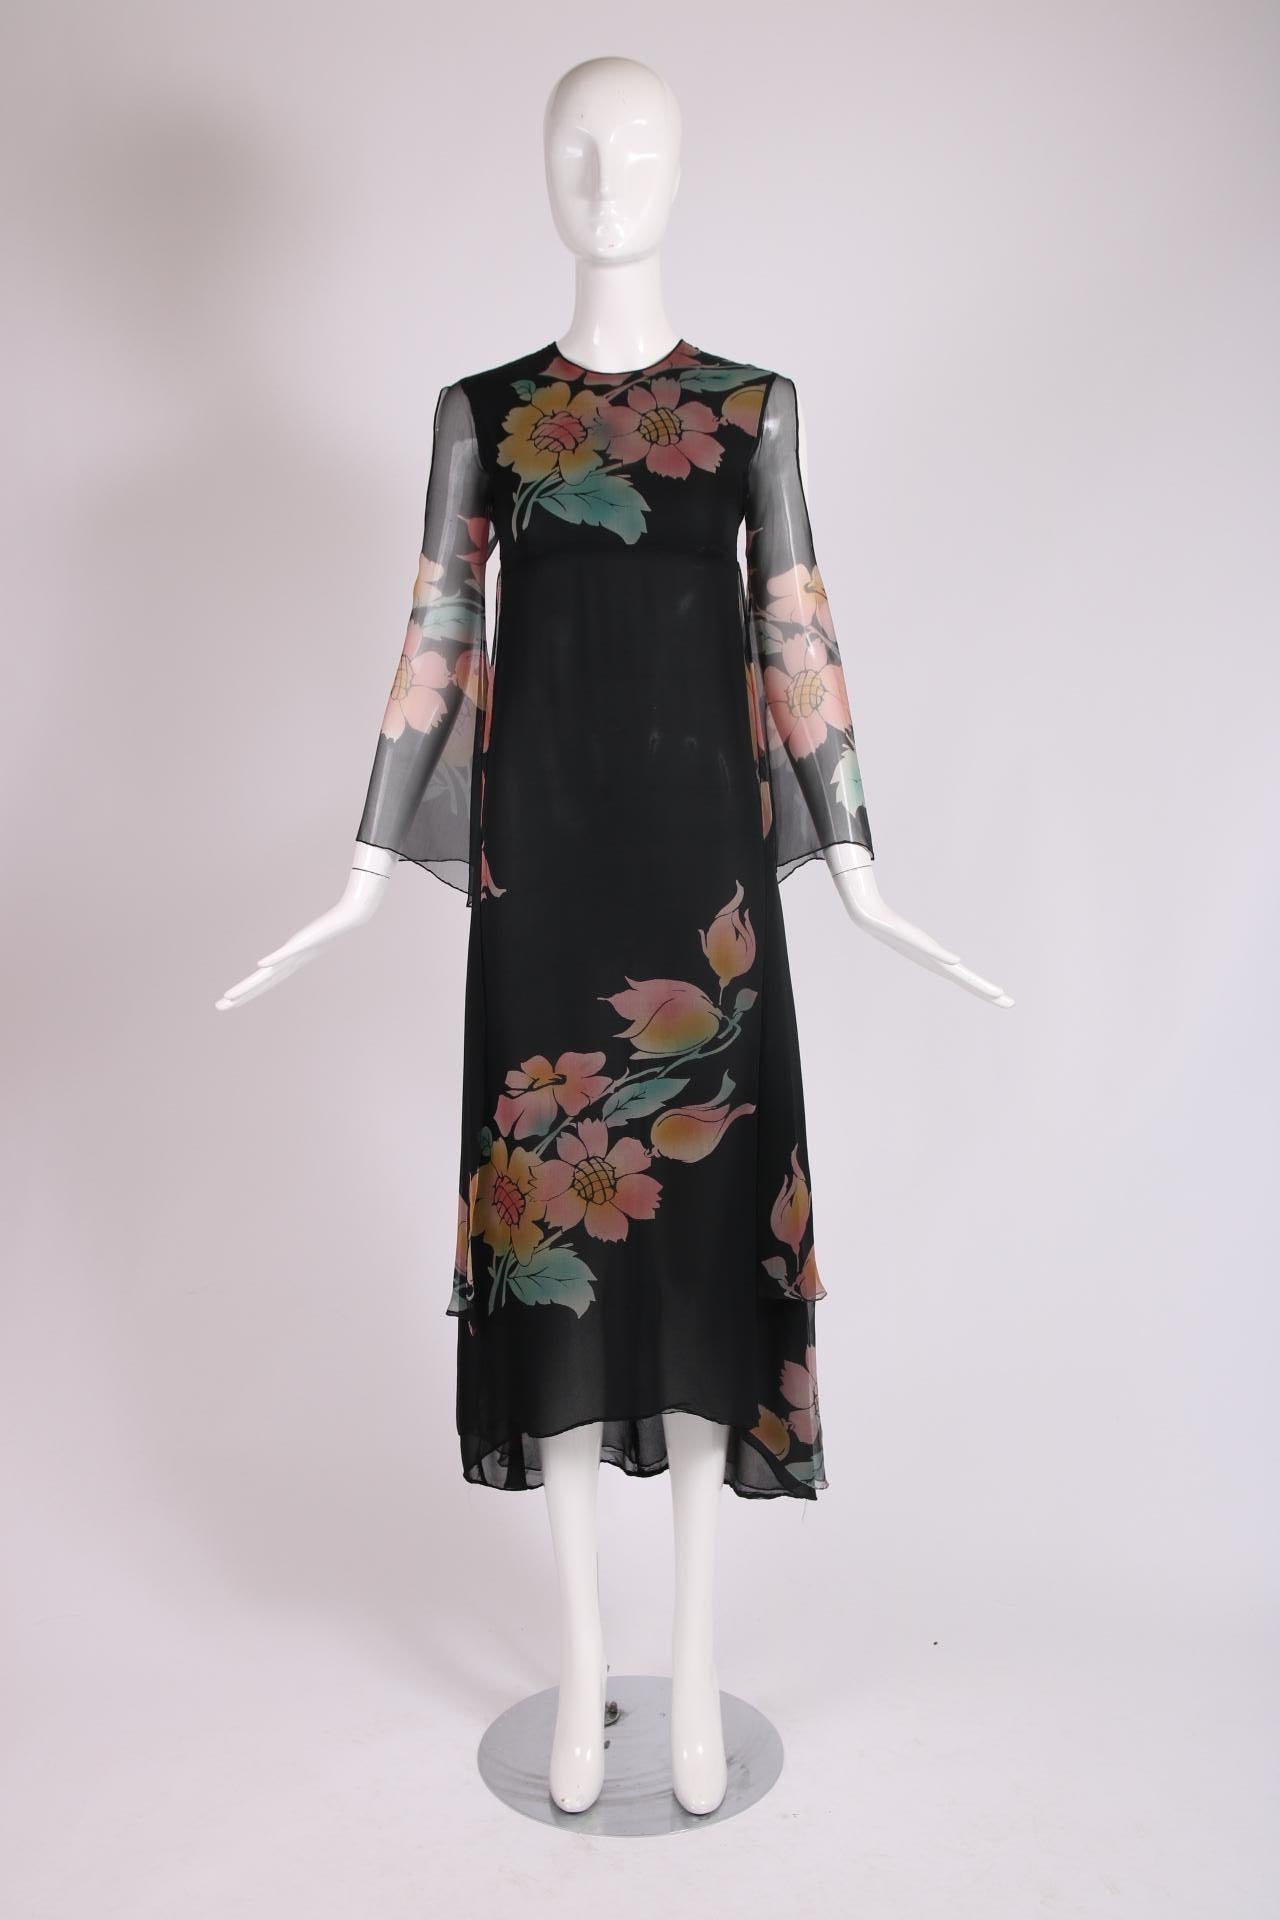 1970's Thea Porter Couture label black multi layered chiffon gown with an empire silhouette, an asymmetric floral print, a high-low hem, floating fabric panels at the back, cutouts at the upper sleeve which tapers out into a mild flute shape at the